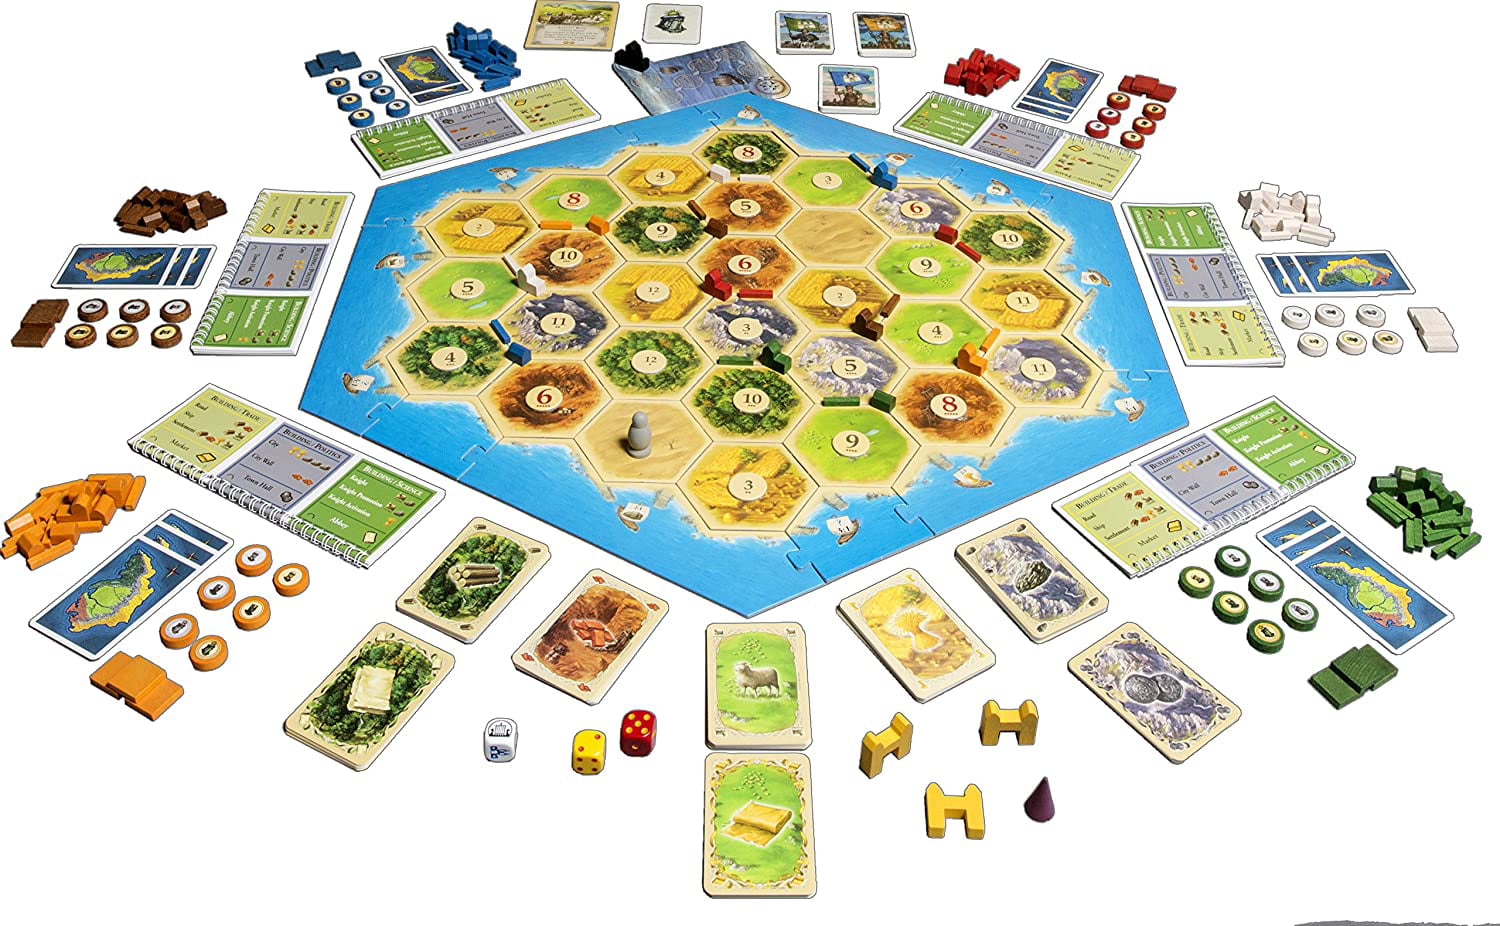 Mayfair Games Catan Cities and Knights Game Expansion